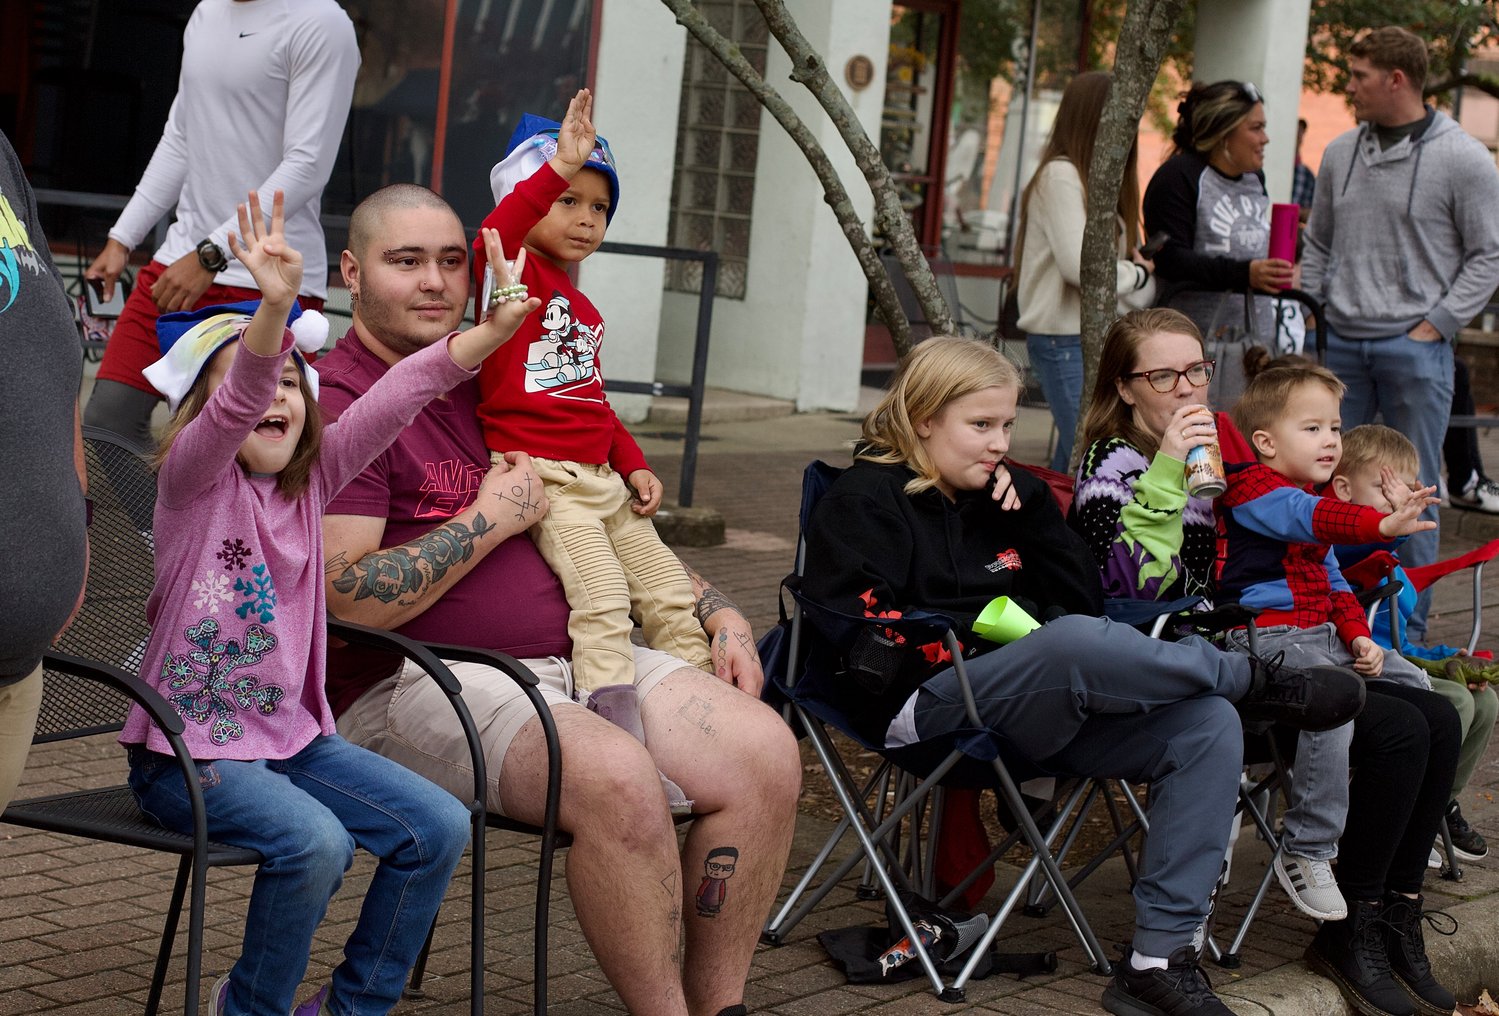 People watch as the Fayetteville Rotary Christmas Parade makes its way through downtown Fayetteville on Saturday.